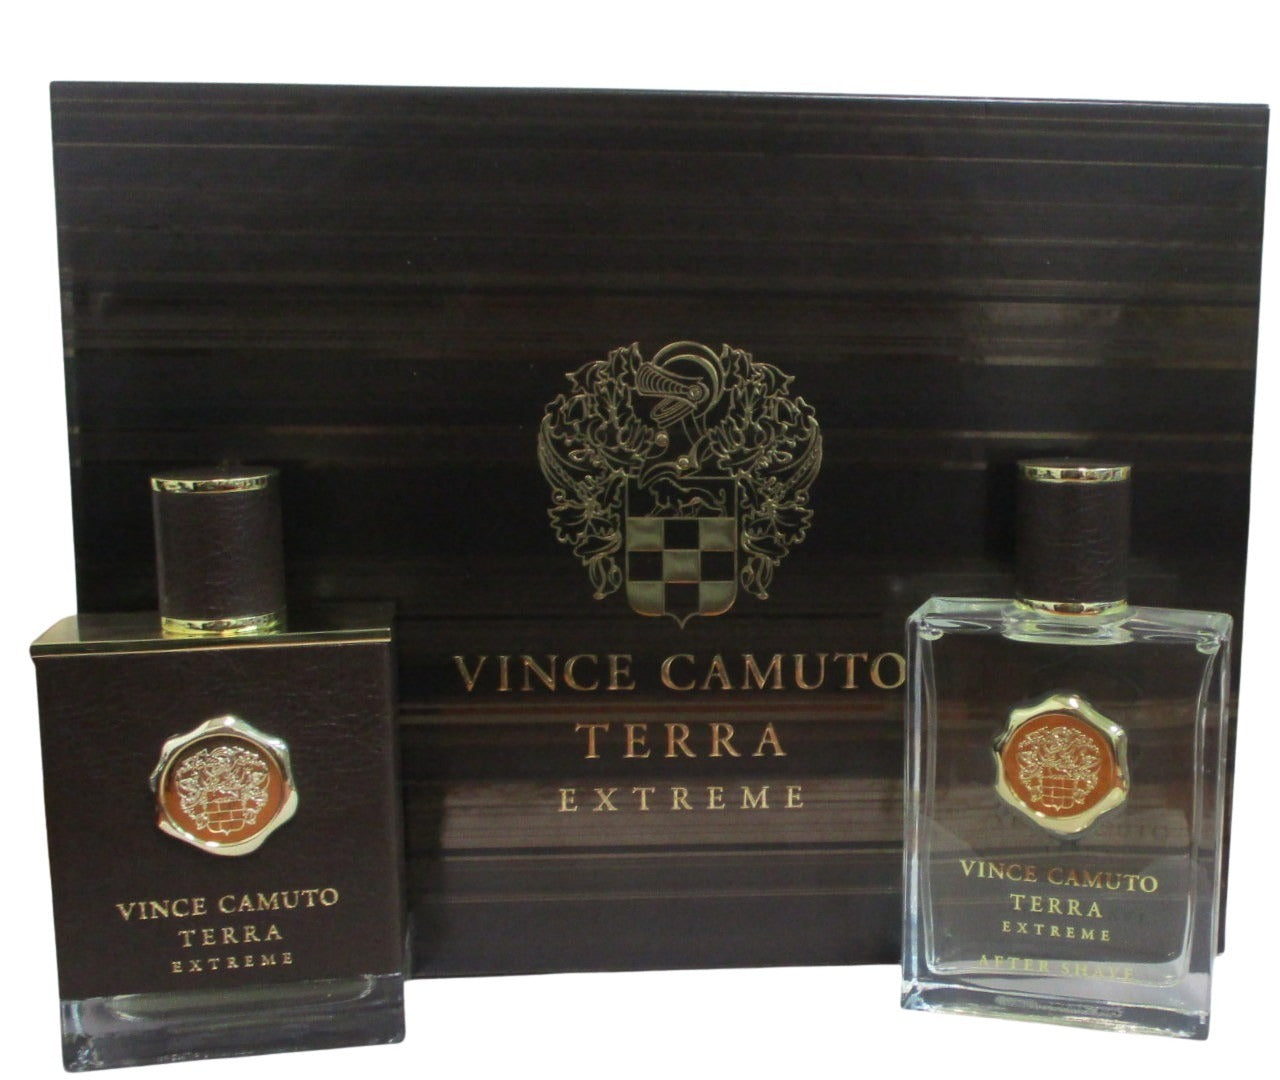 — Vince Camuto Terra Extreme